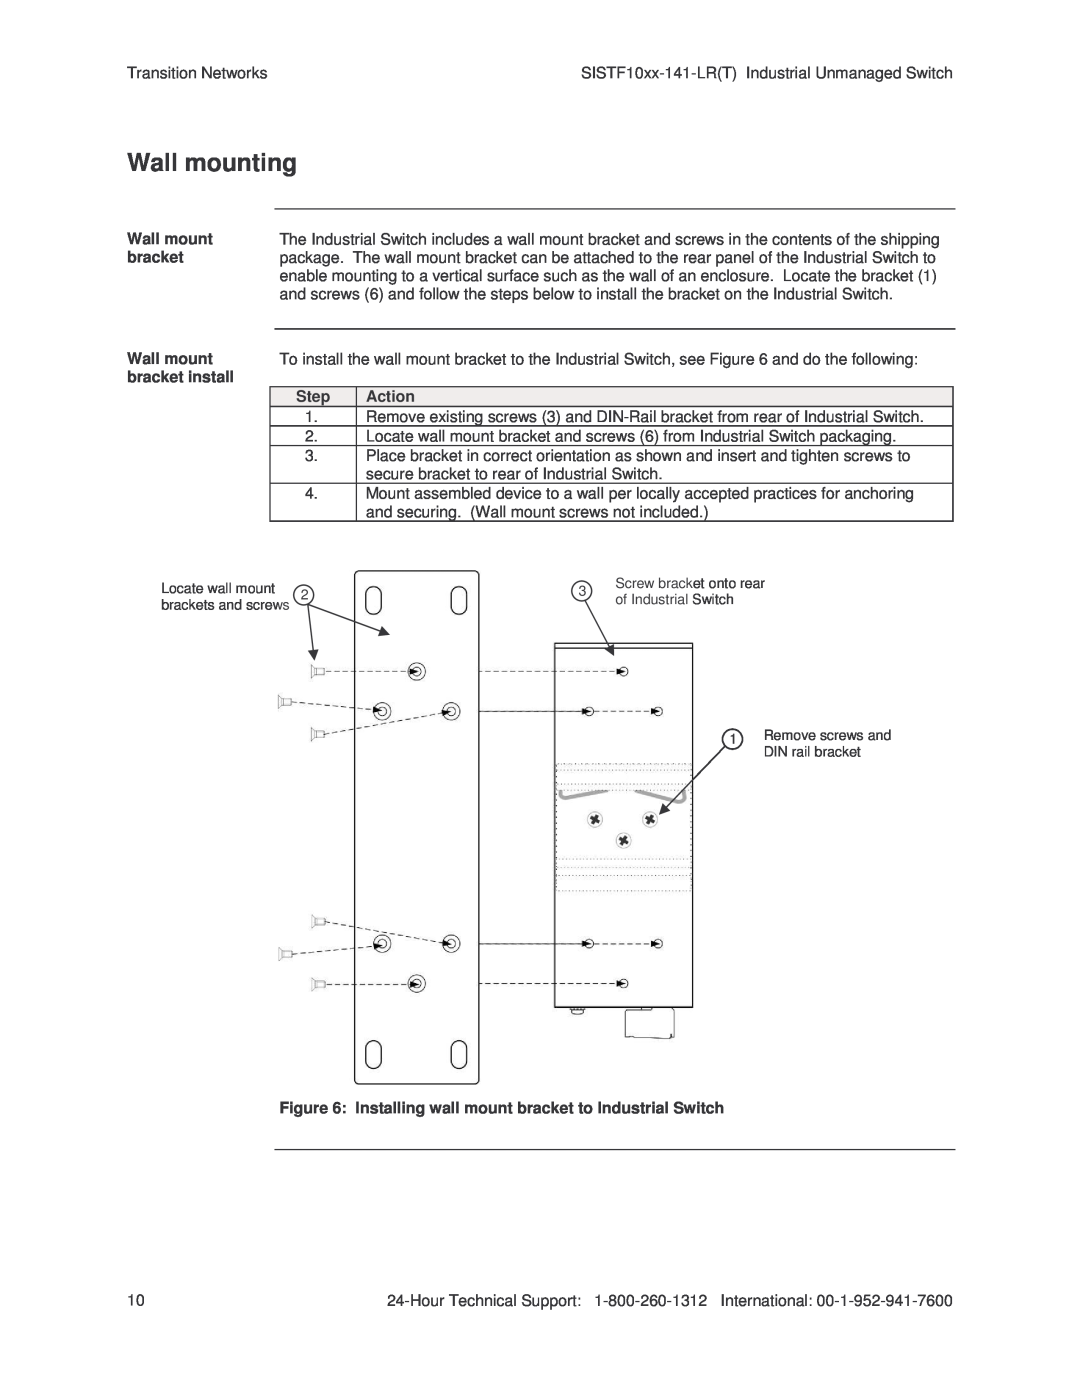 Transition Networks SISTF10xx-141-LR(T) installation manual Wall mounting 